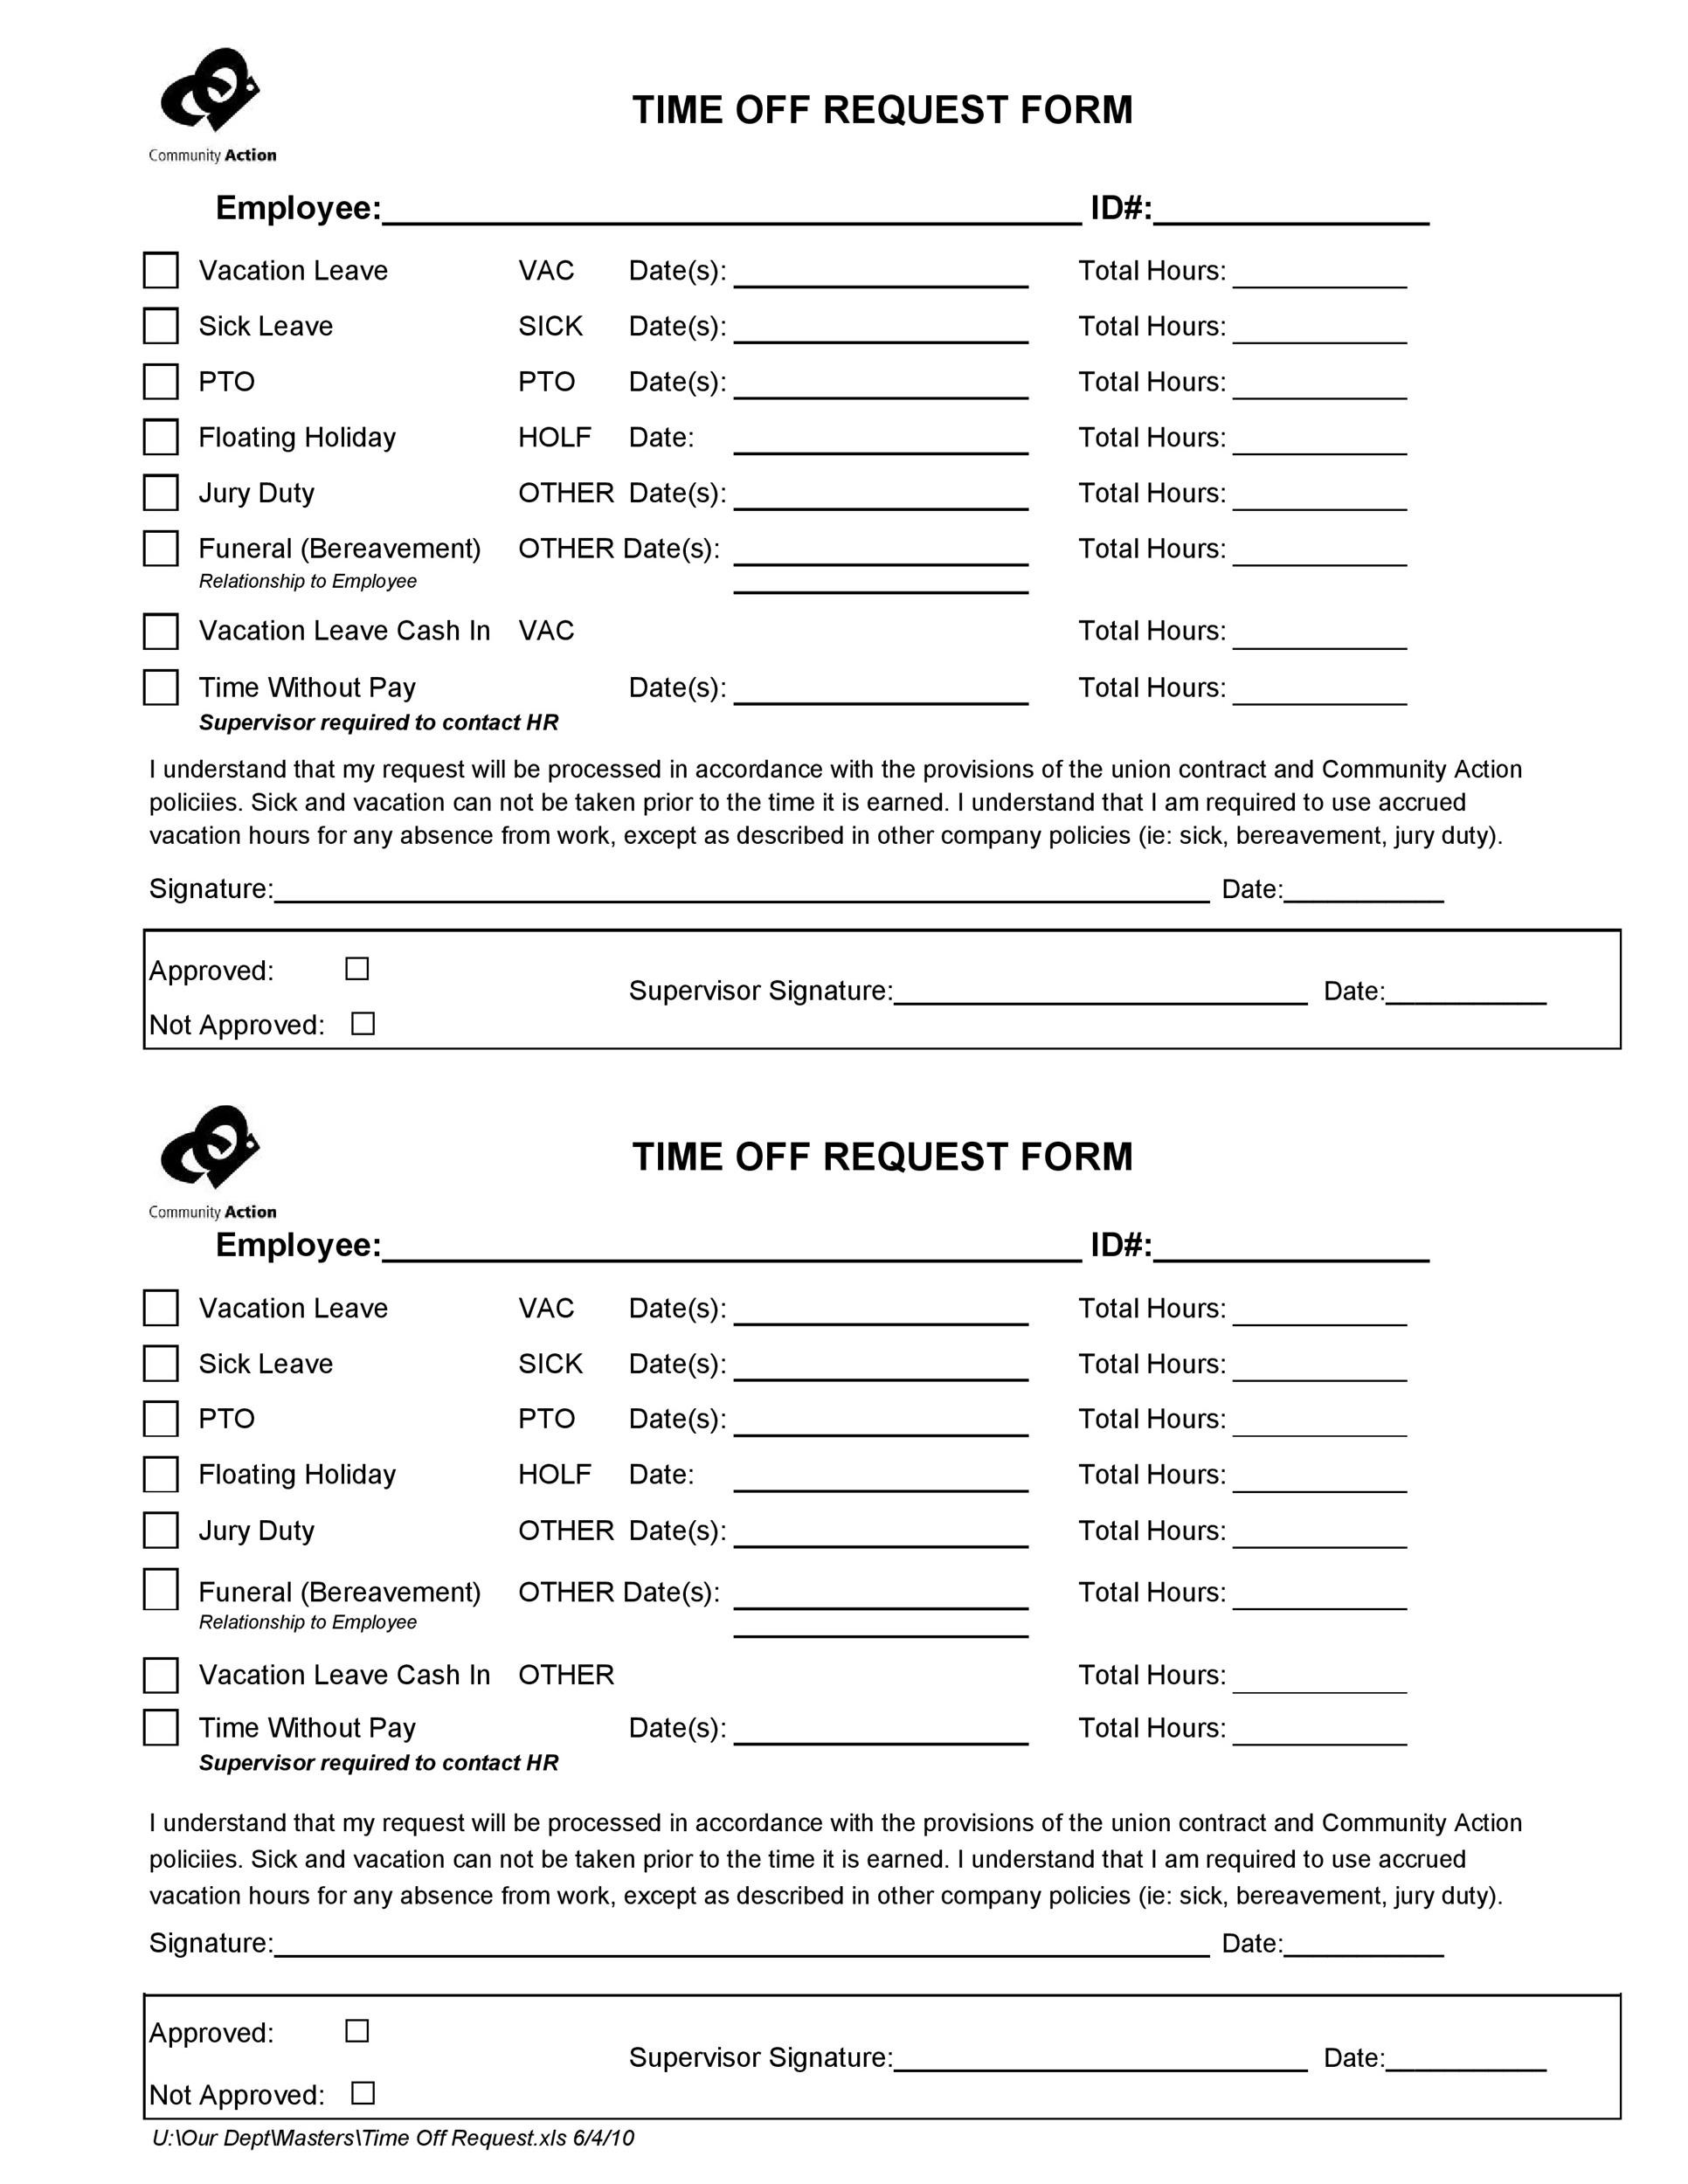 Free time off request form template 29